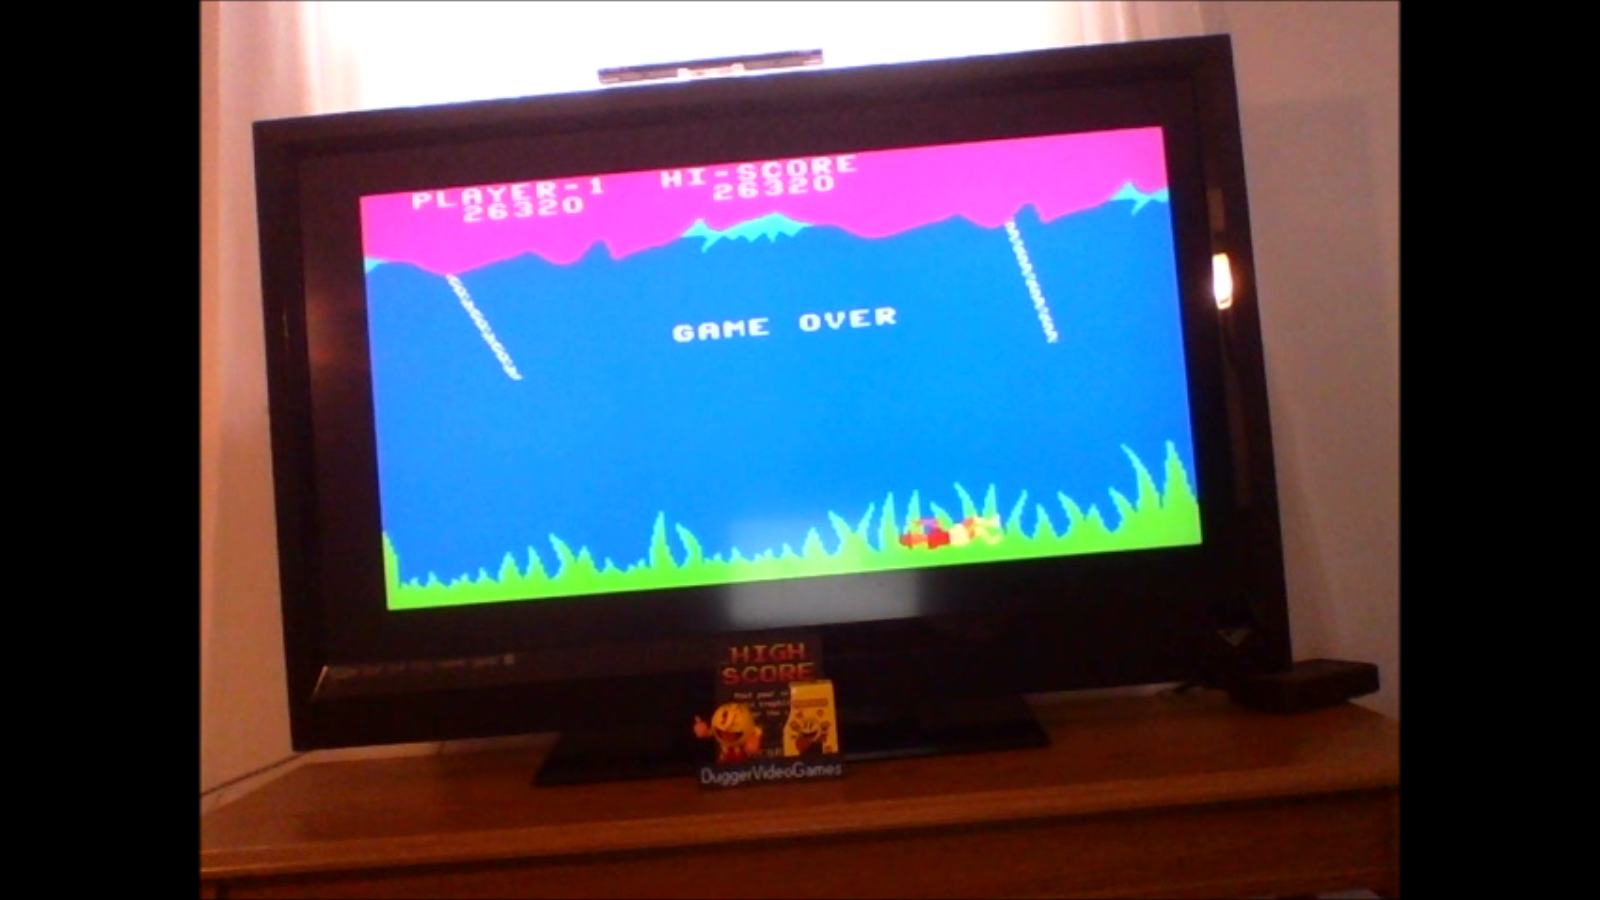 DuggerVideoGames: Jungle Hunt: Skill 3 (Colecovision Emulated) 26,320 points on 2017-01-26 11:42:28